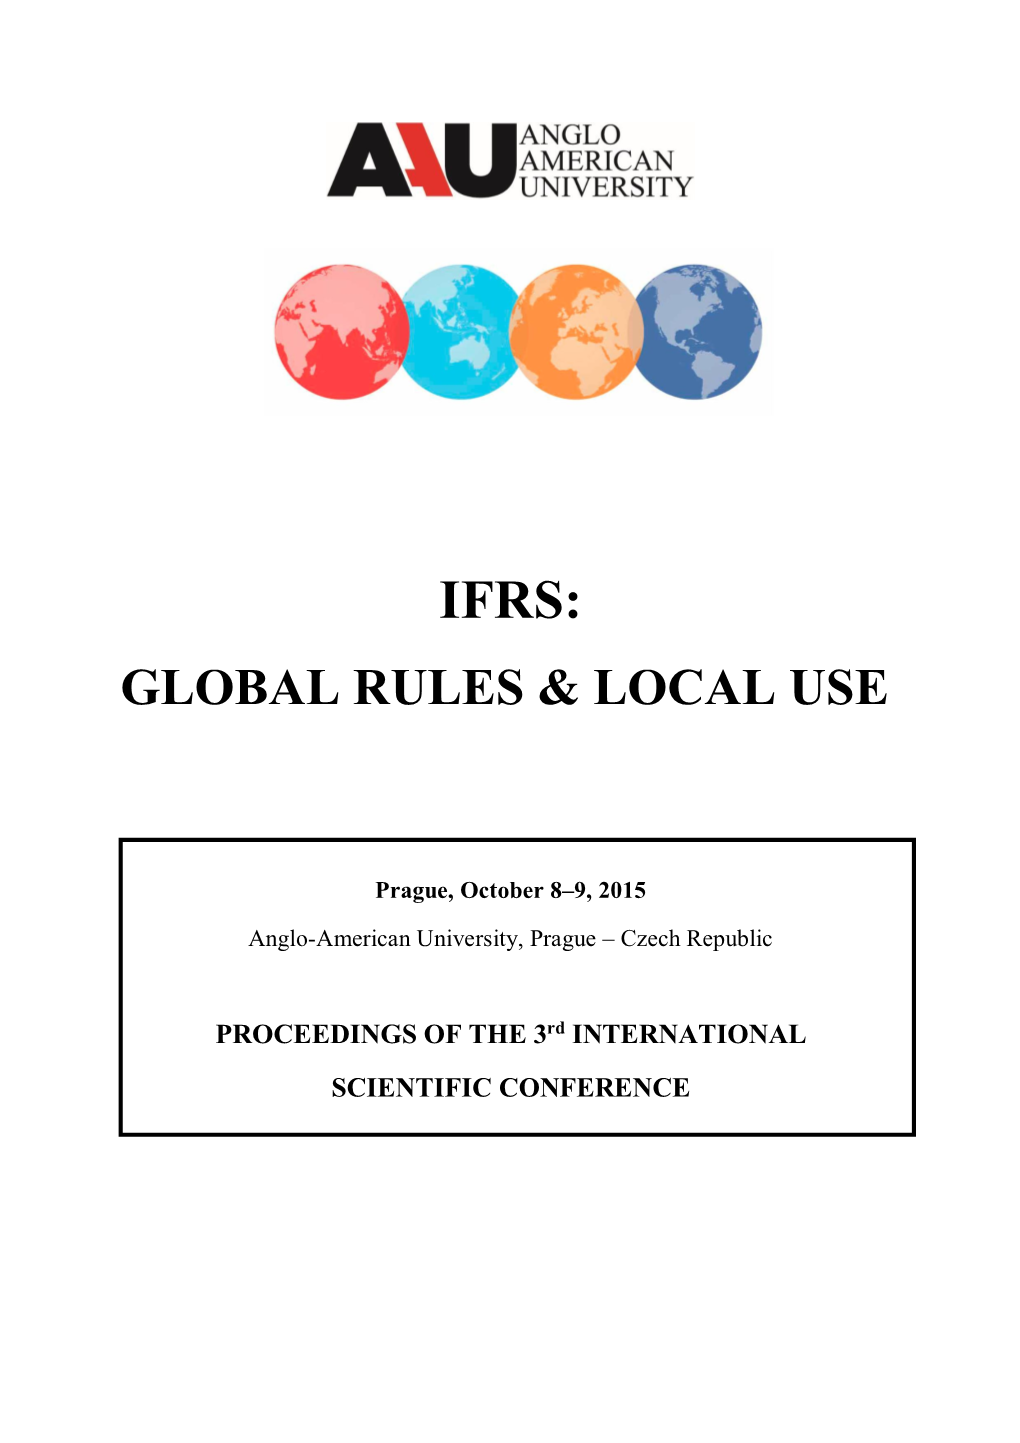 IFRS Global Rules & Local Use 2015